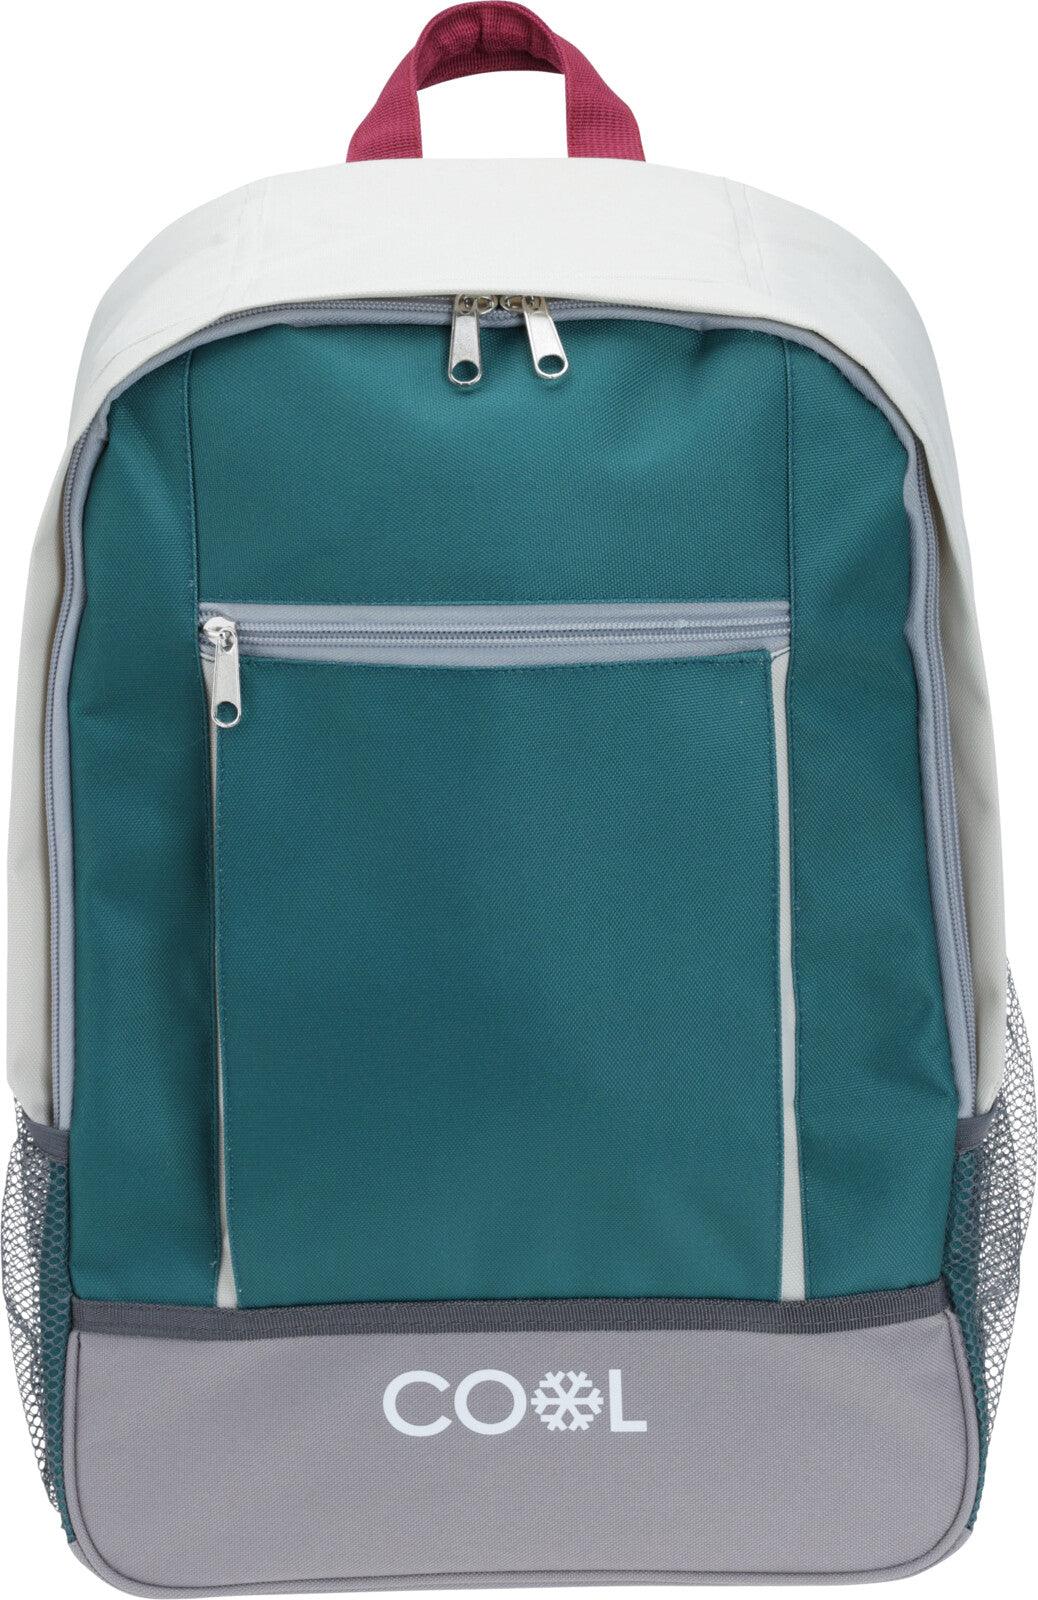 Cool Backpack Cooler Bag | Assorted Colour | 20L - Choice Stores